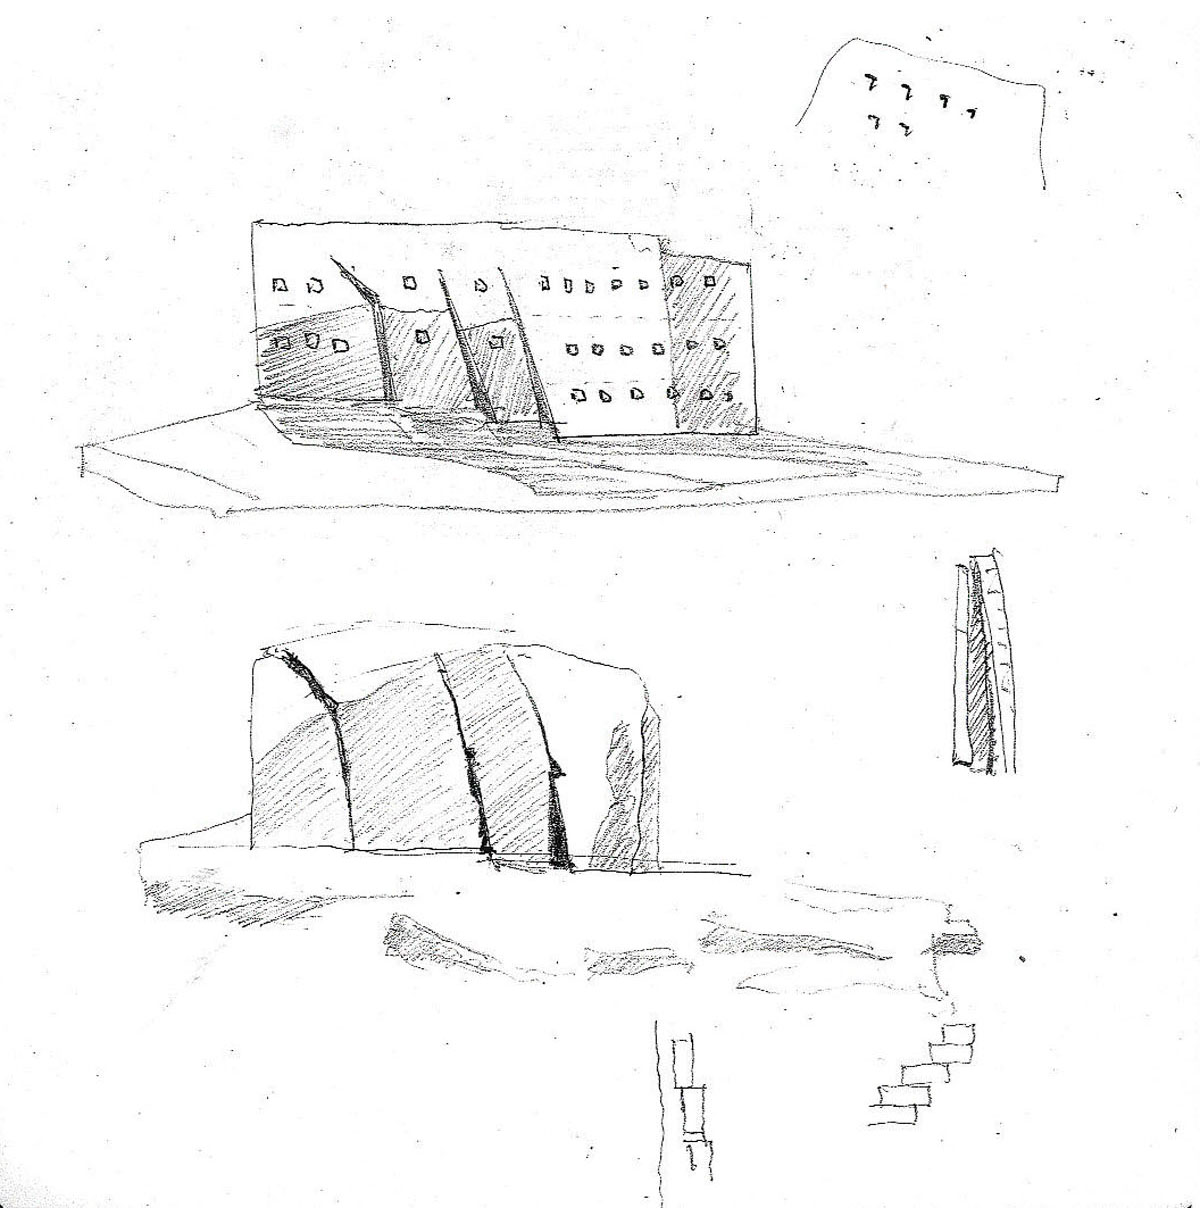 Sketch of possible building exteriors with the design inspired by nature.